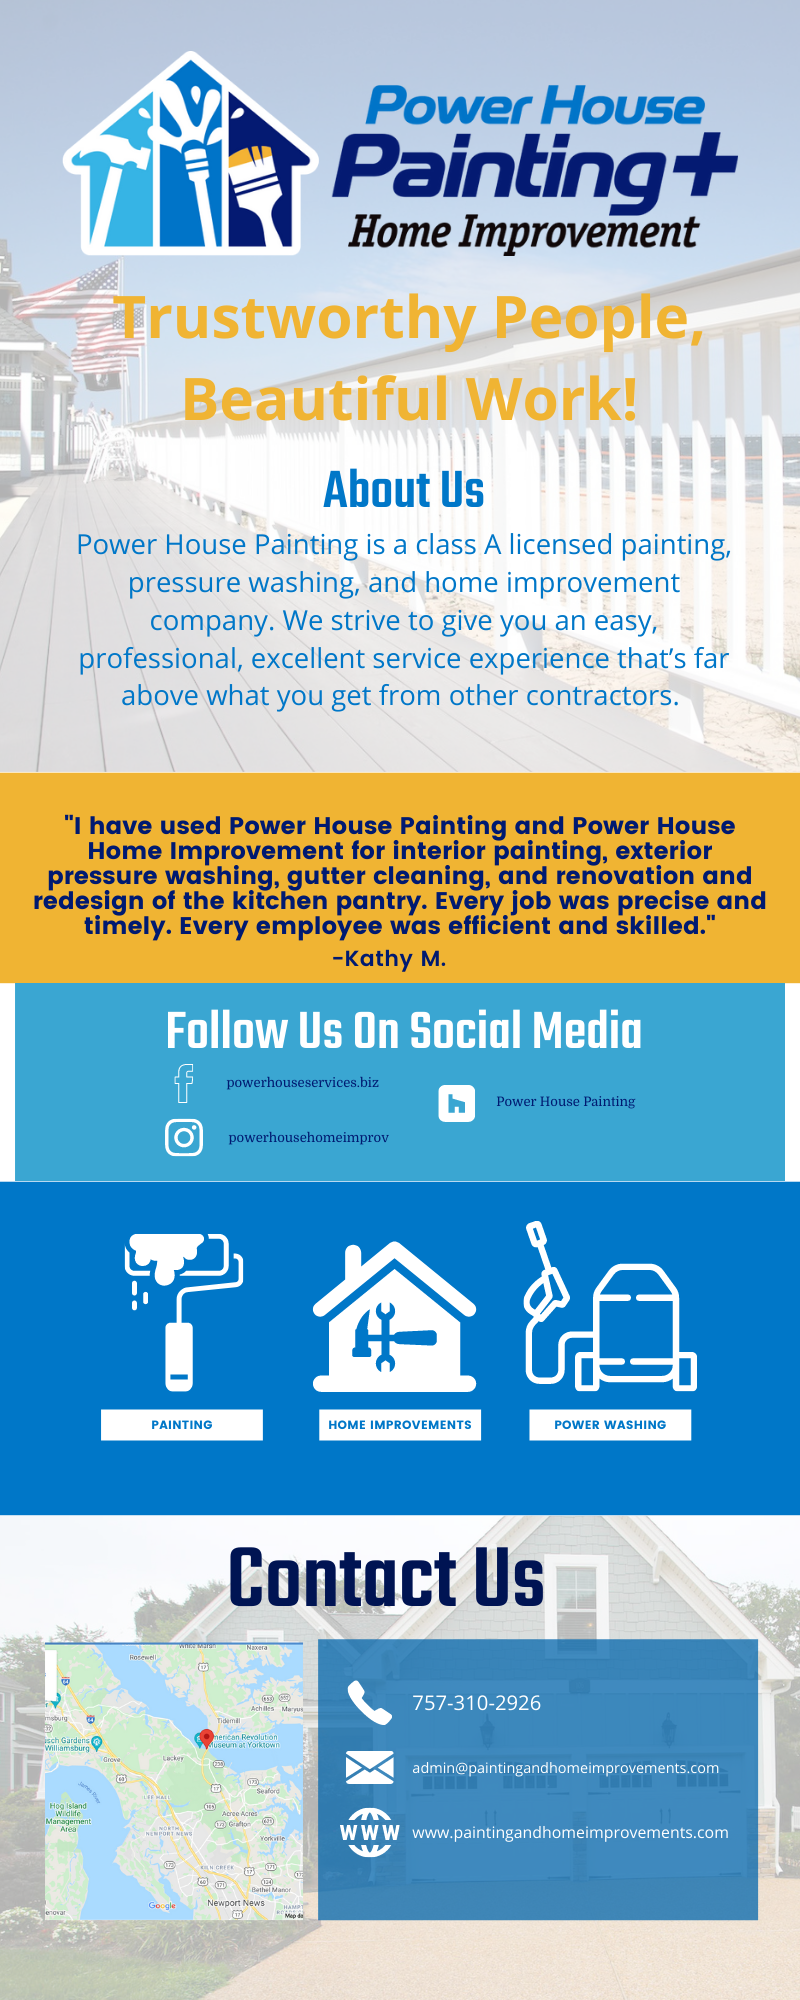 Power House Home Improvement Infographic